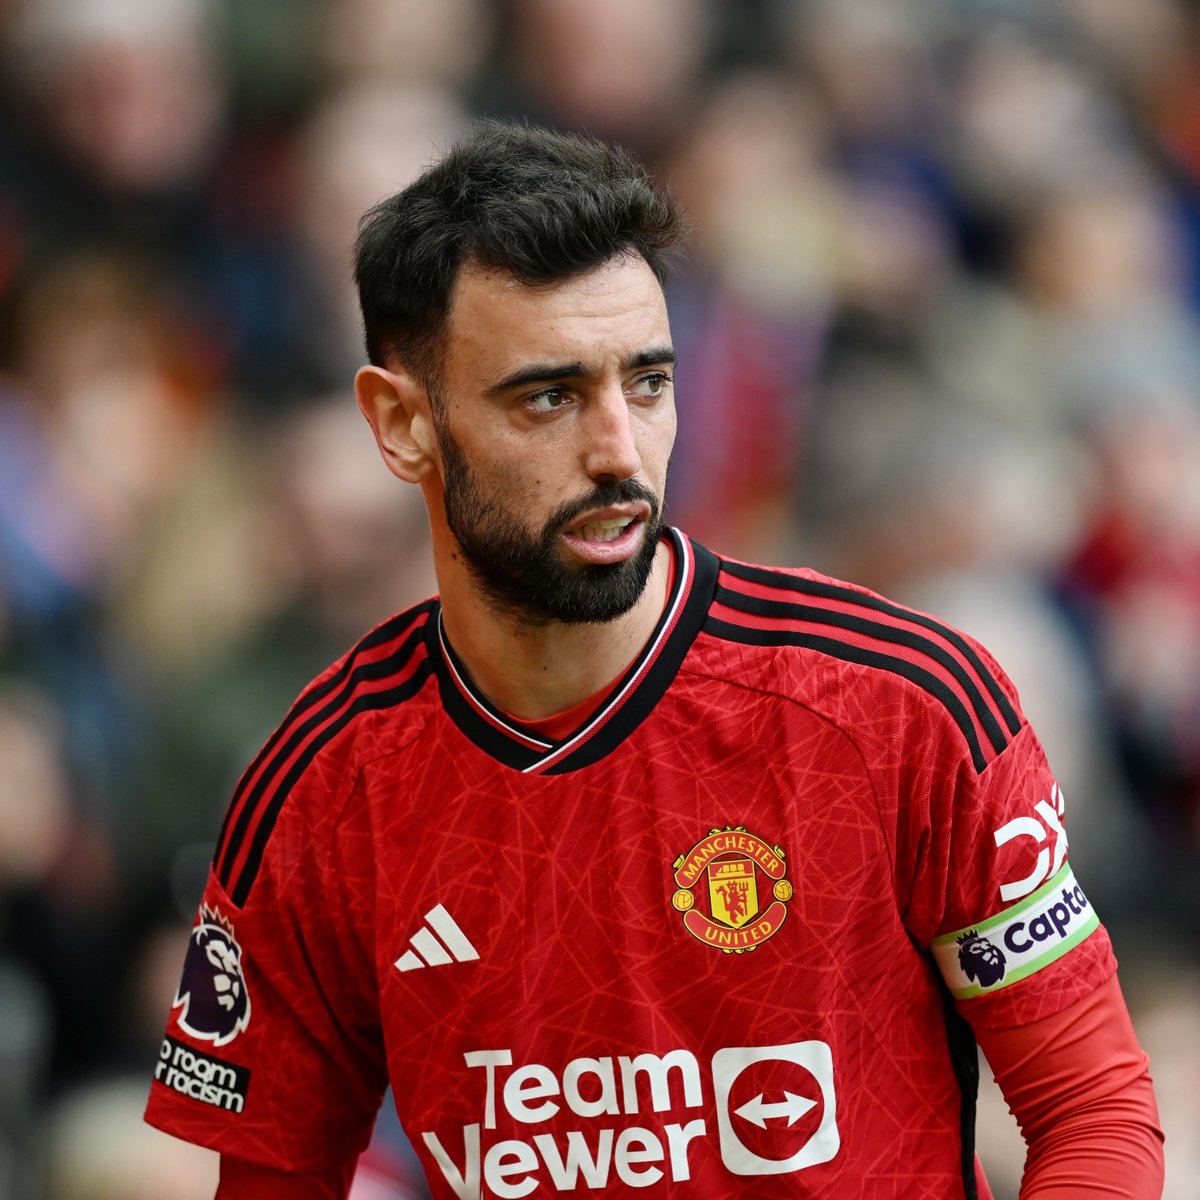 🚨 Al Nassr are one of the Saudi Pro League clubs interested in signing Bruno Fernandes. Al Nassr are aware that United want to keep the midfielder but there is a belief that a large enough bid could tempt the club to cash in. (Source: @RobDawsonESPN)